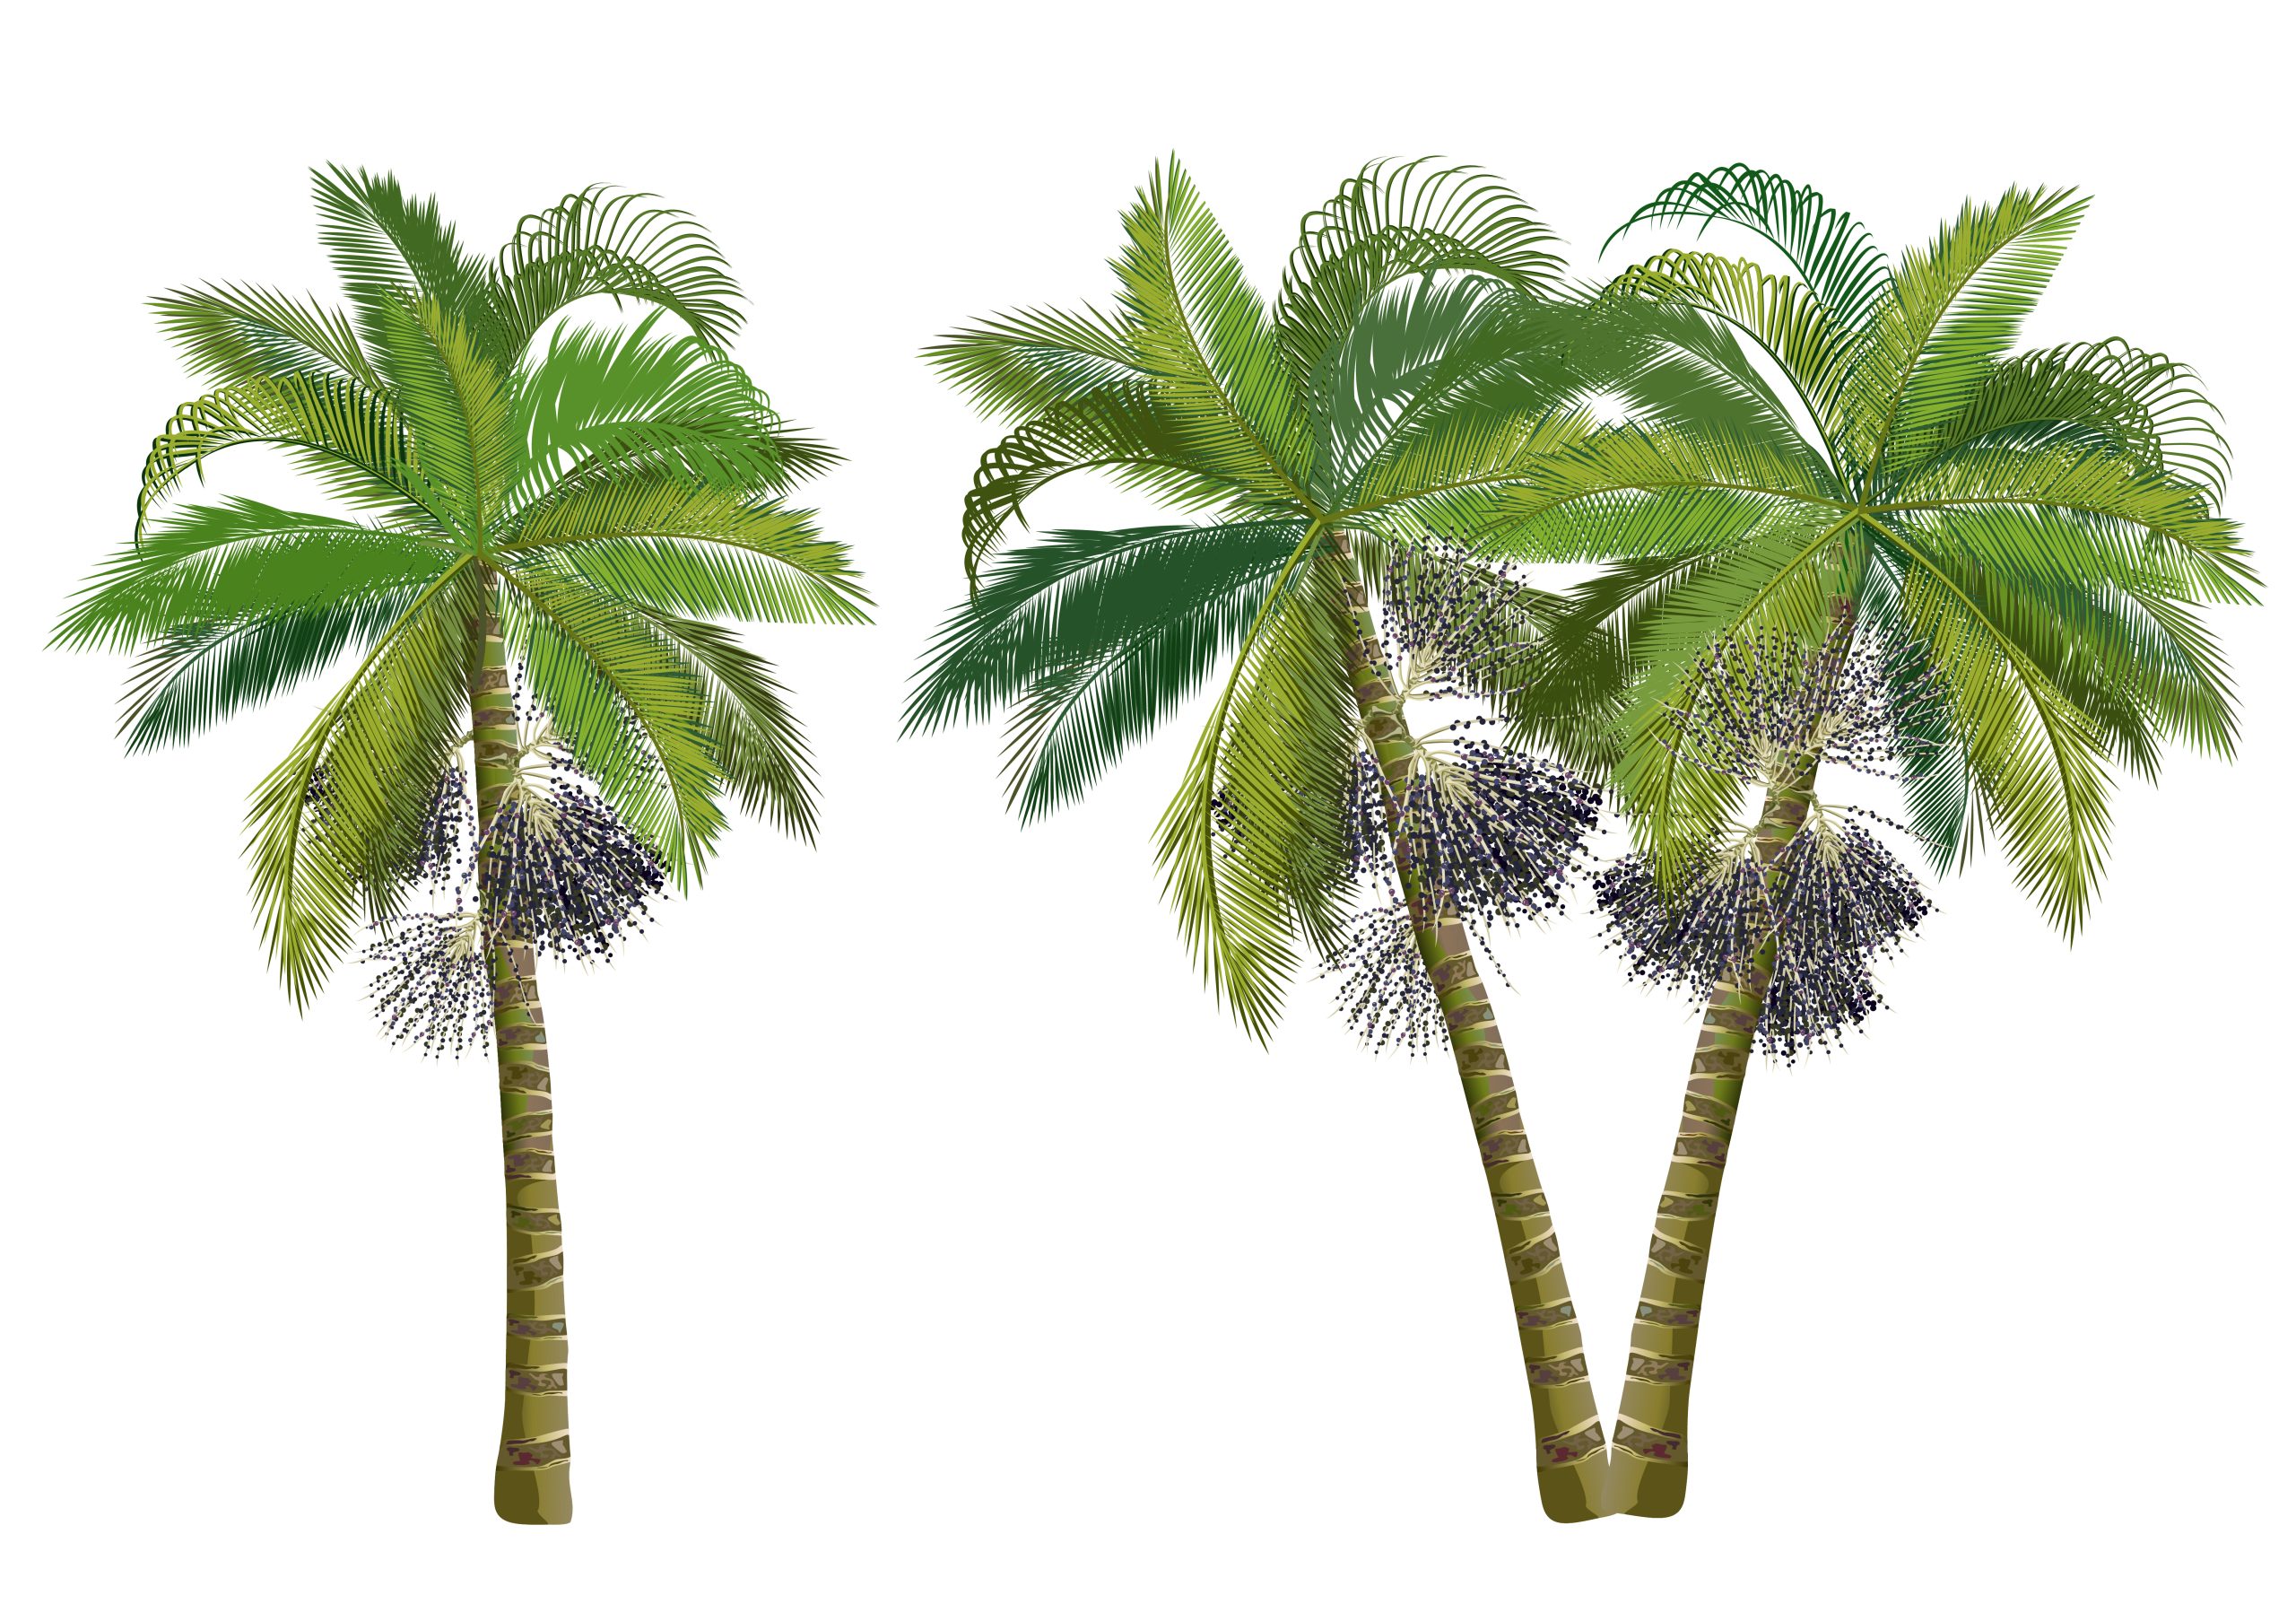 3 acai palm trees with berries